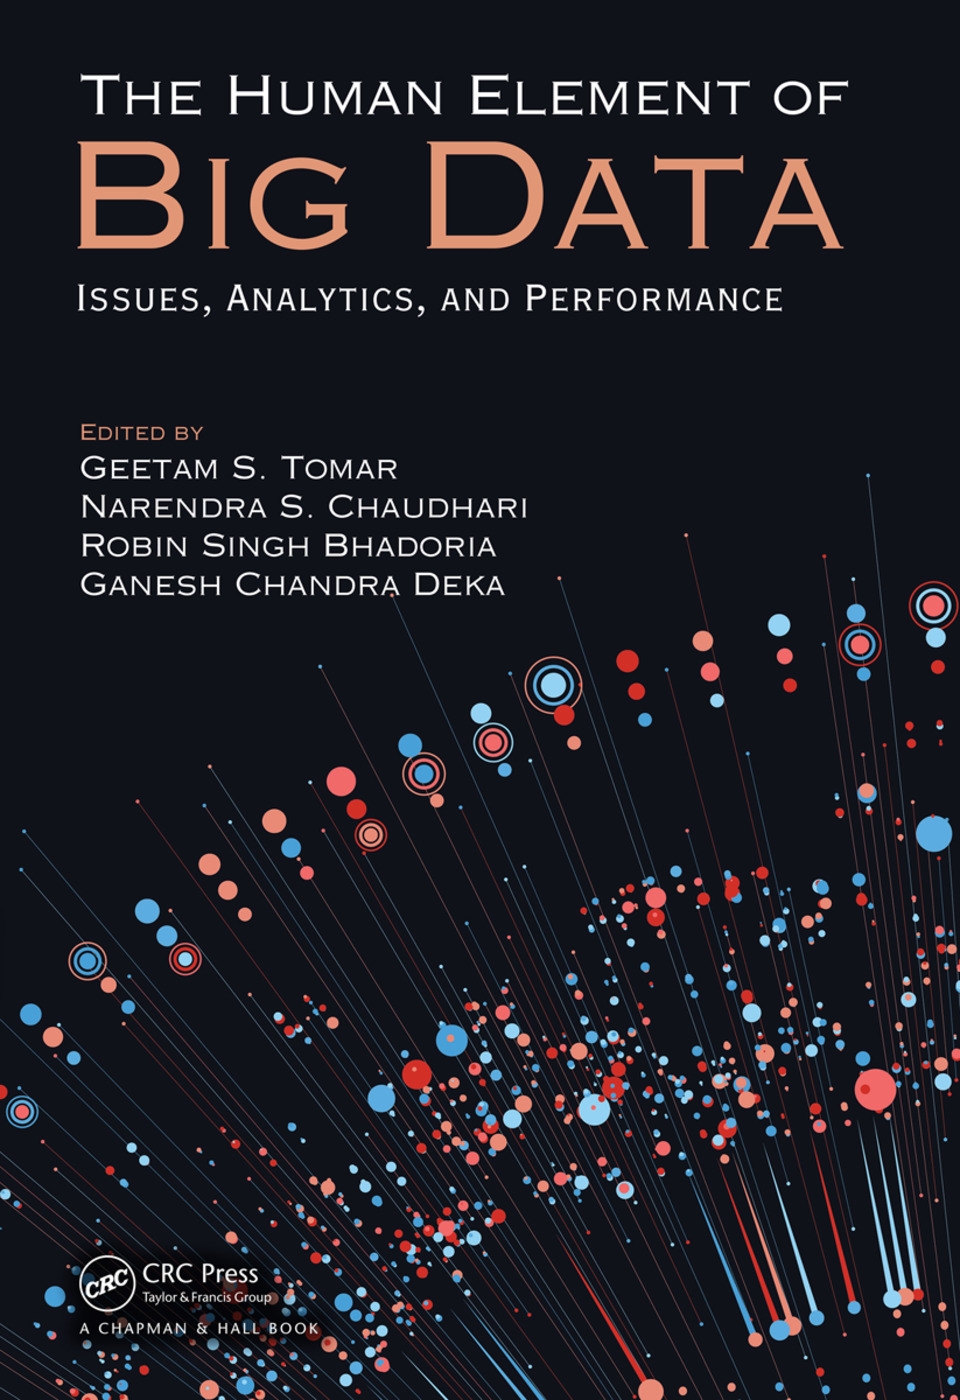 The Human Element of Big Data: Issues, Analytics, and Performance